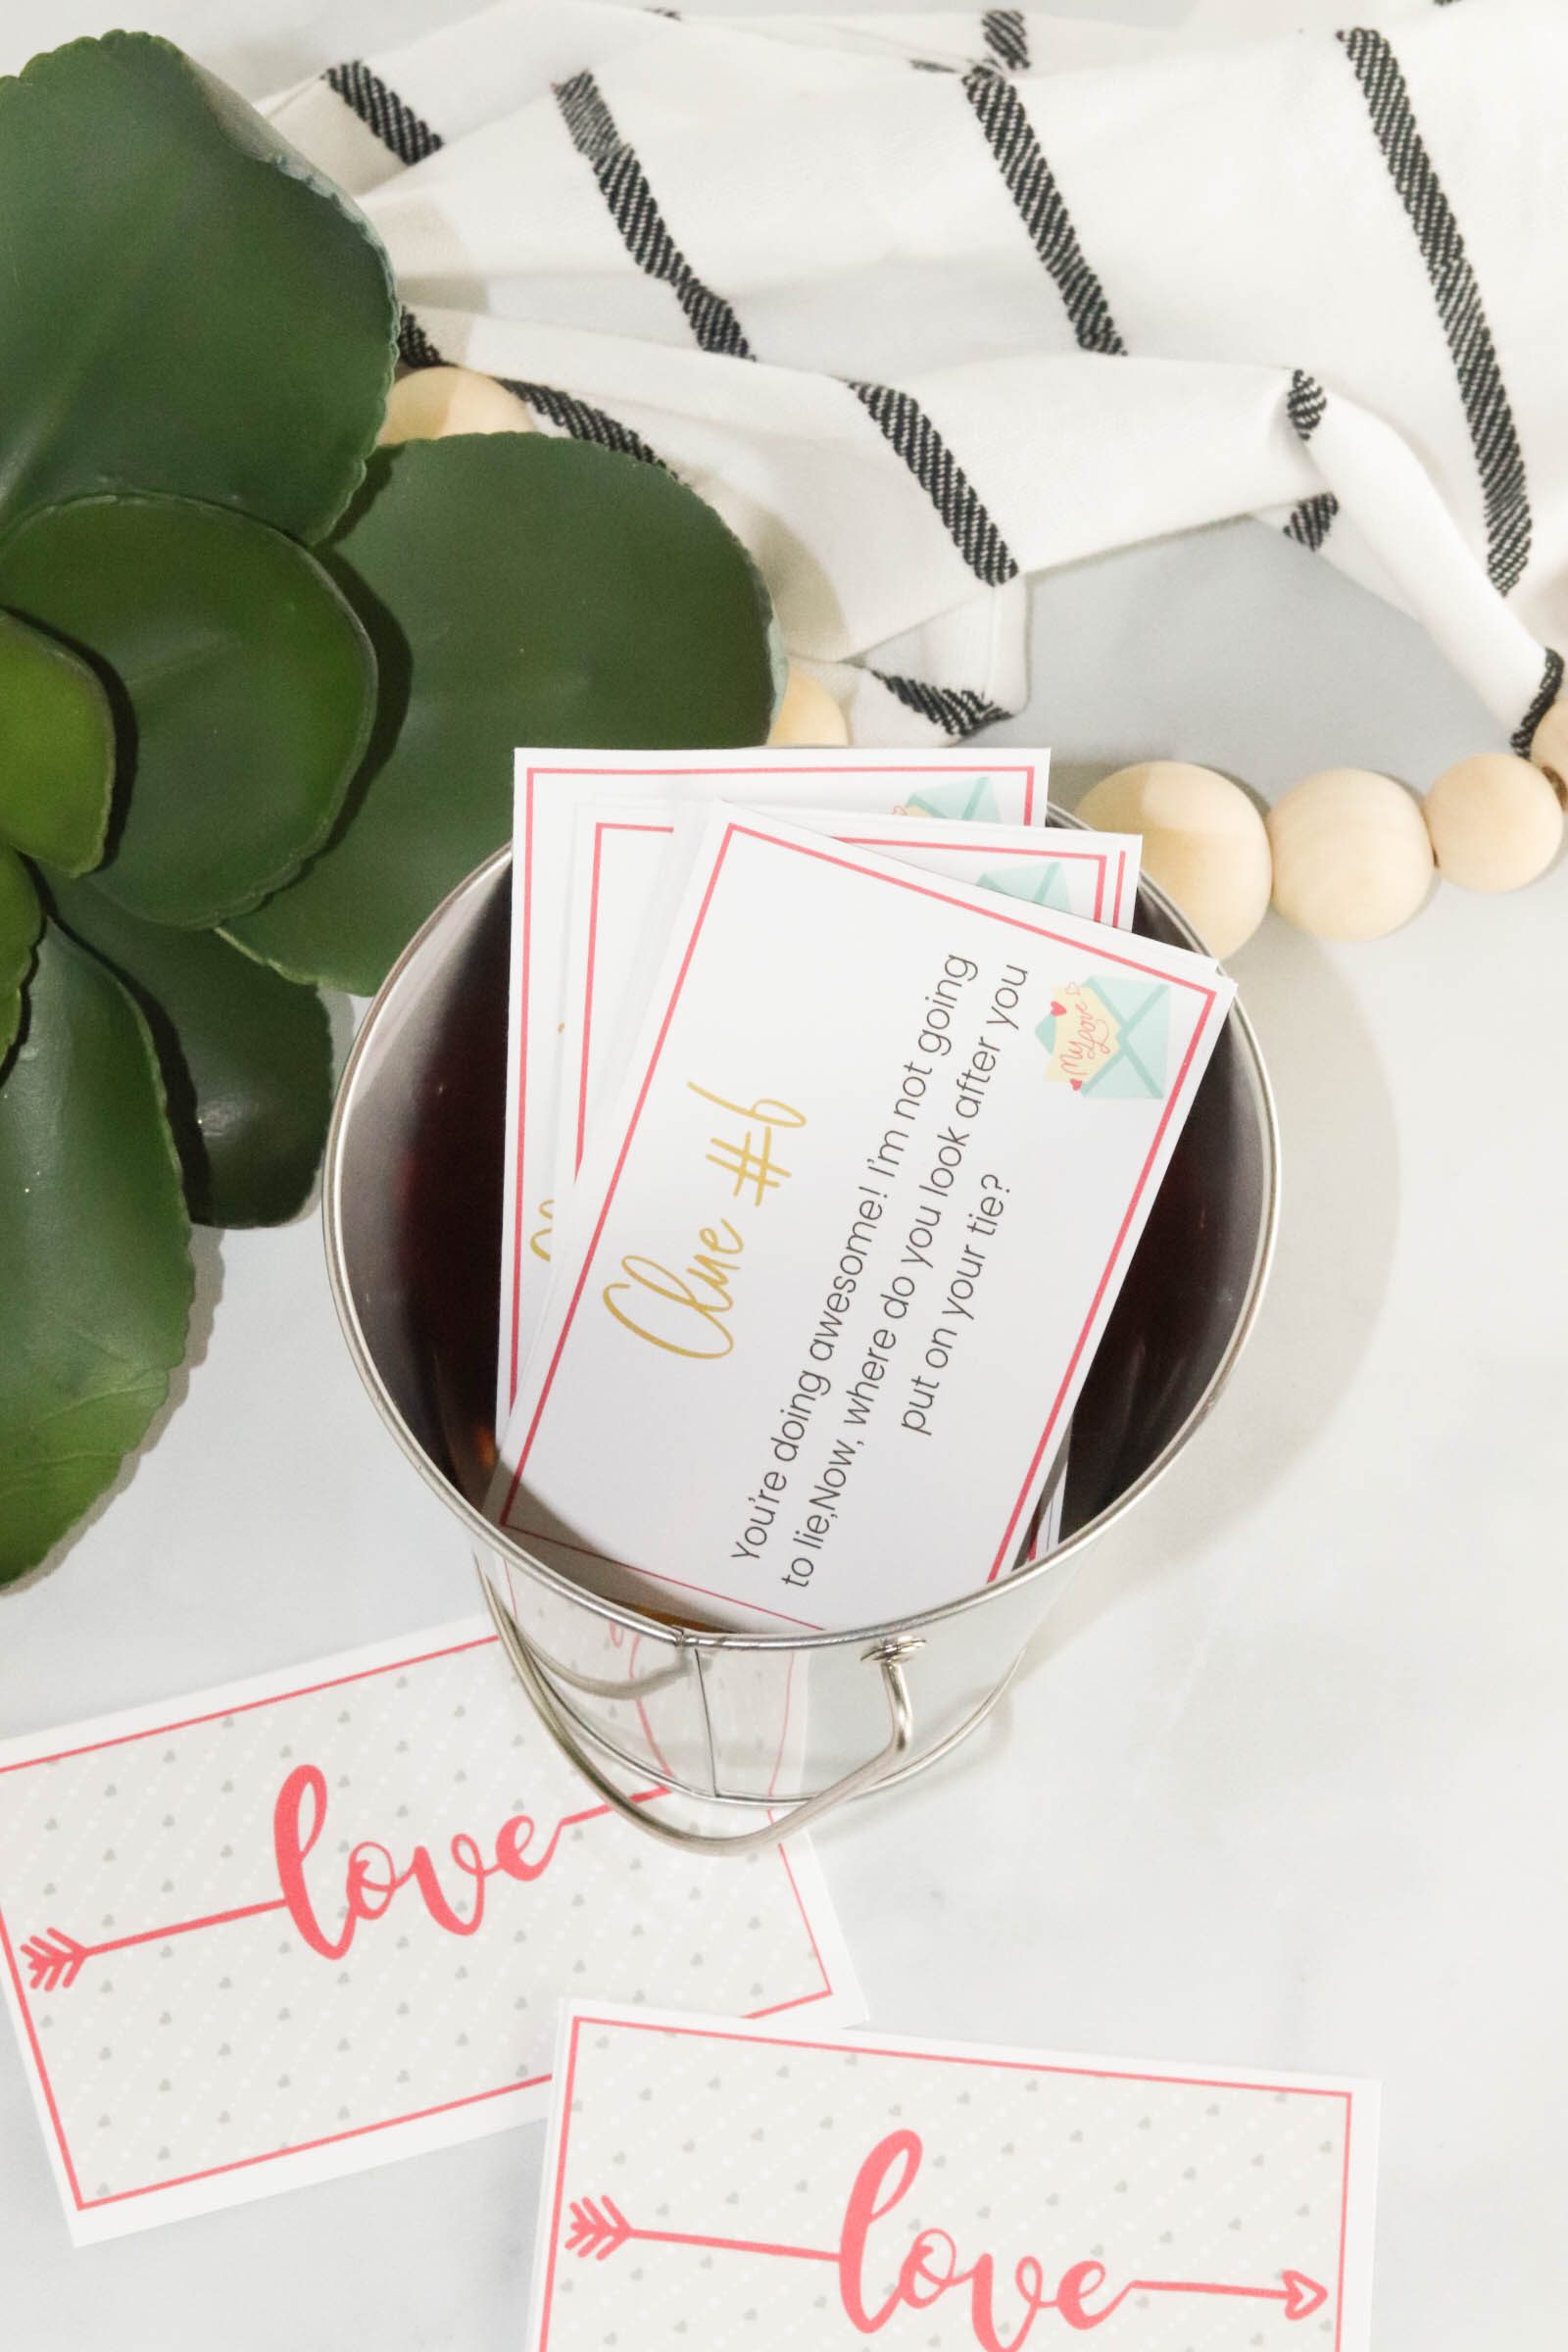 Are you looking for a fun way to surprise the one you love? Create a cute date night or special occasion with this adorable romantic scavenger hunt! Your significant other will love where this fun romantic scavenger hunt takes you.